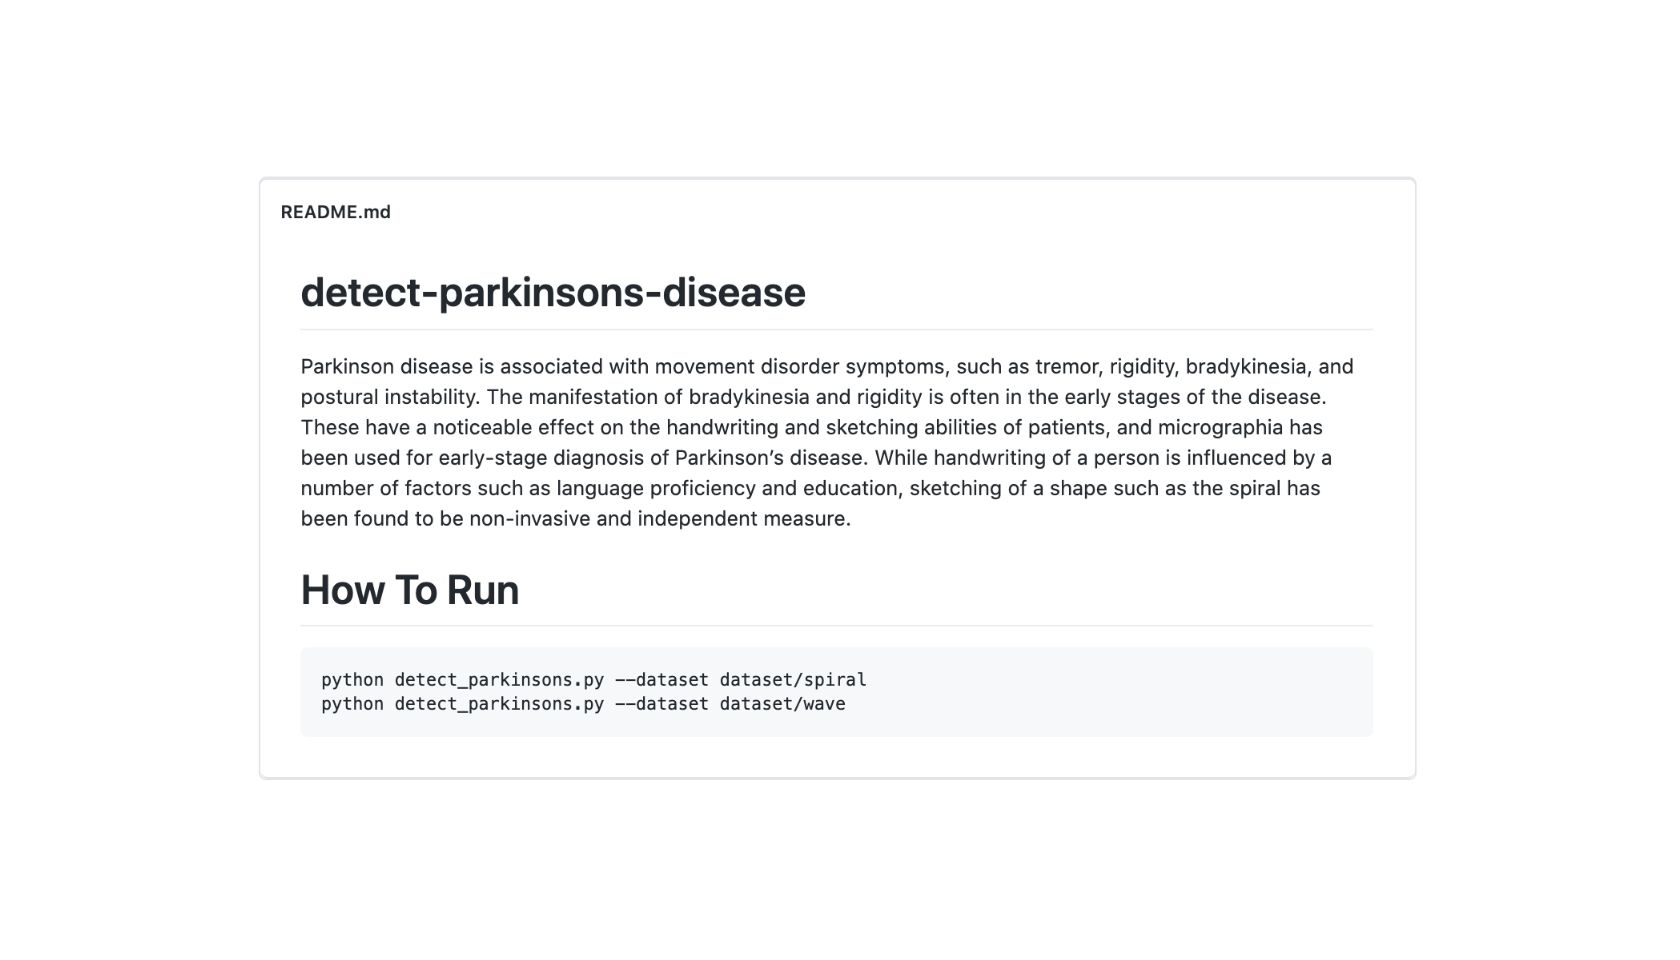 Early Stage Prediction of Parkinson's Disease